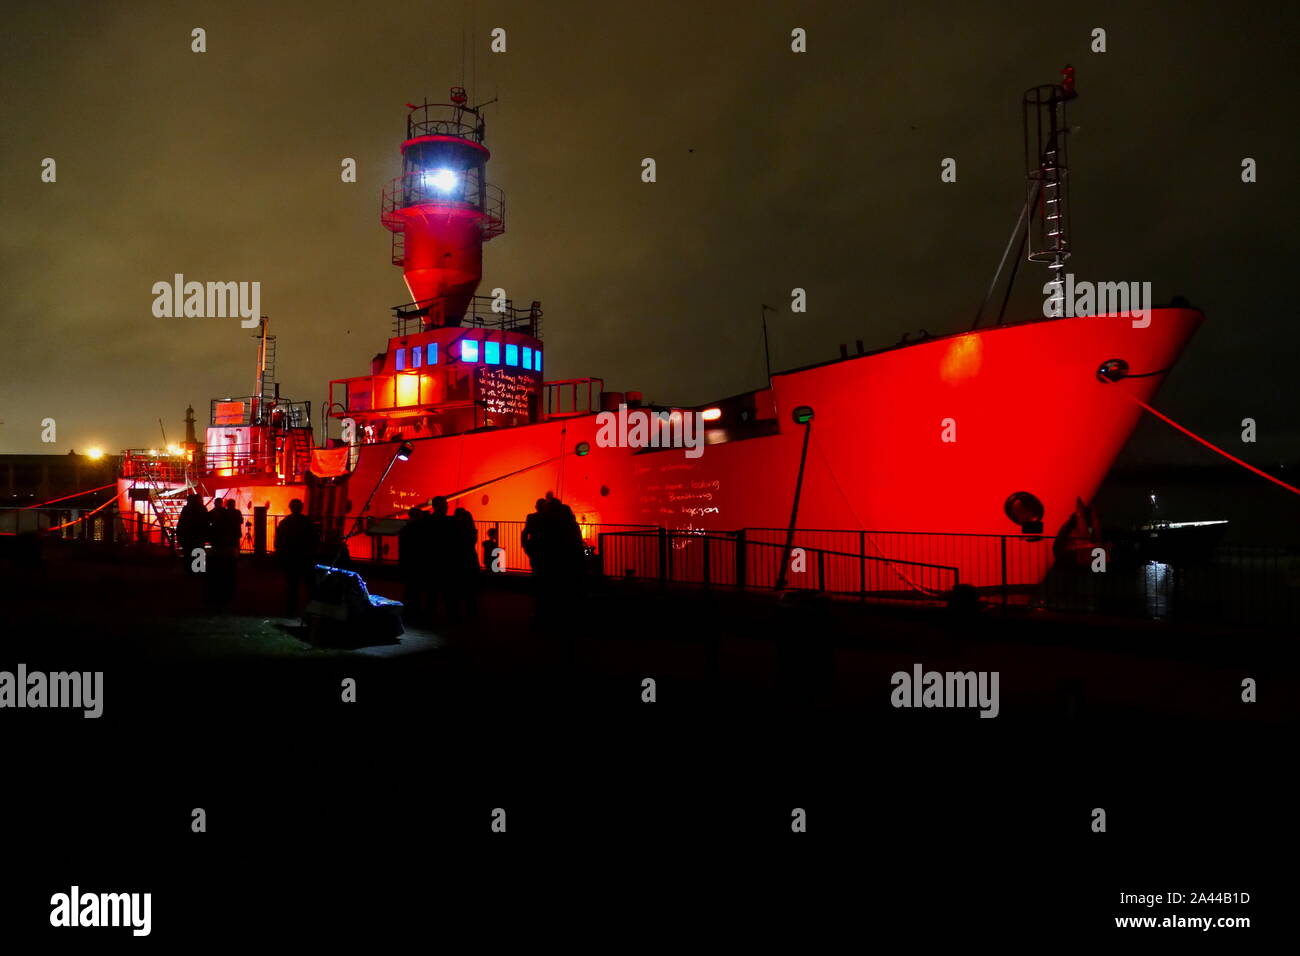 LV 21 is a former Goodwin Sands lightship now repurposed as a